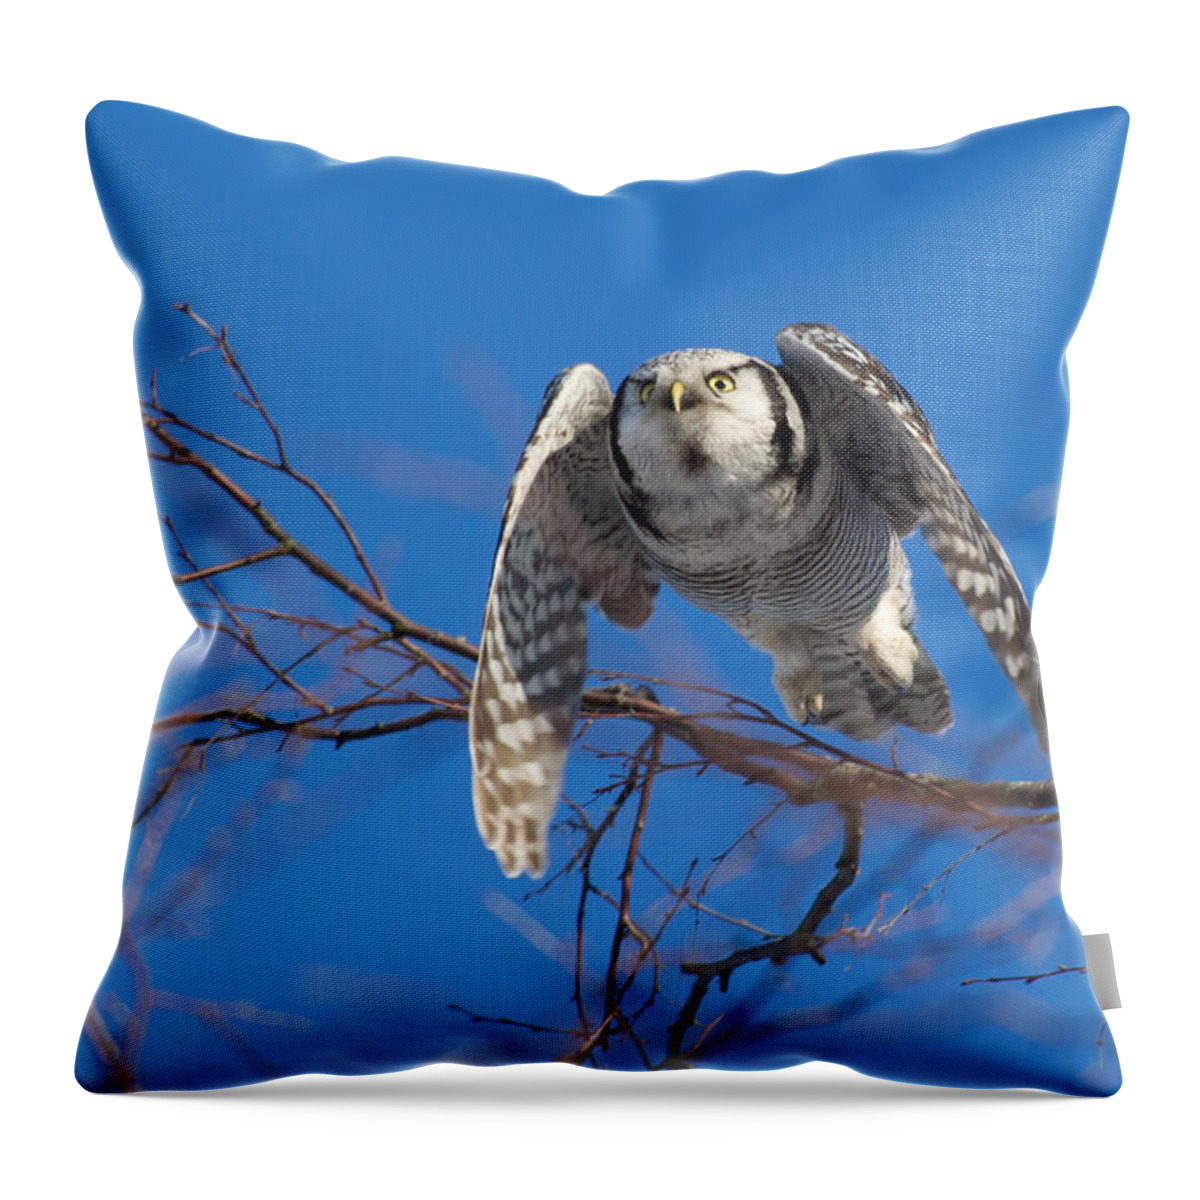 Northern Hawk Owl Throw Pillow featuring the photograph The flying Northern Hawk Owl by Torbjorn Swenelius